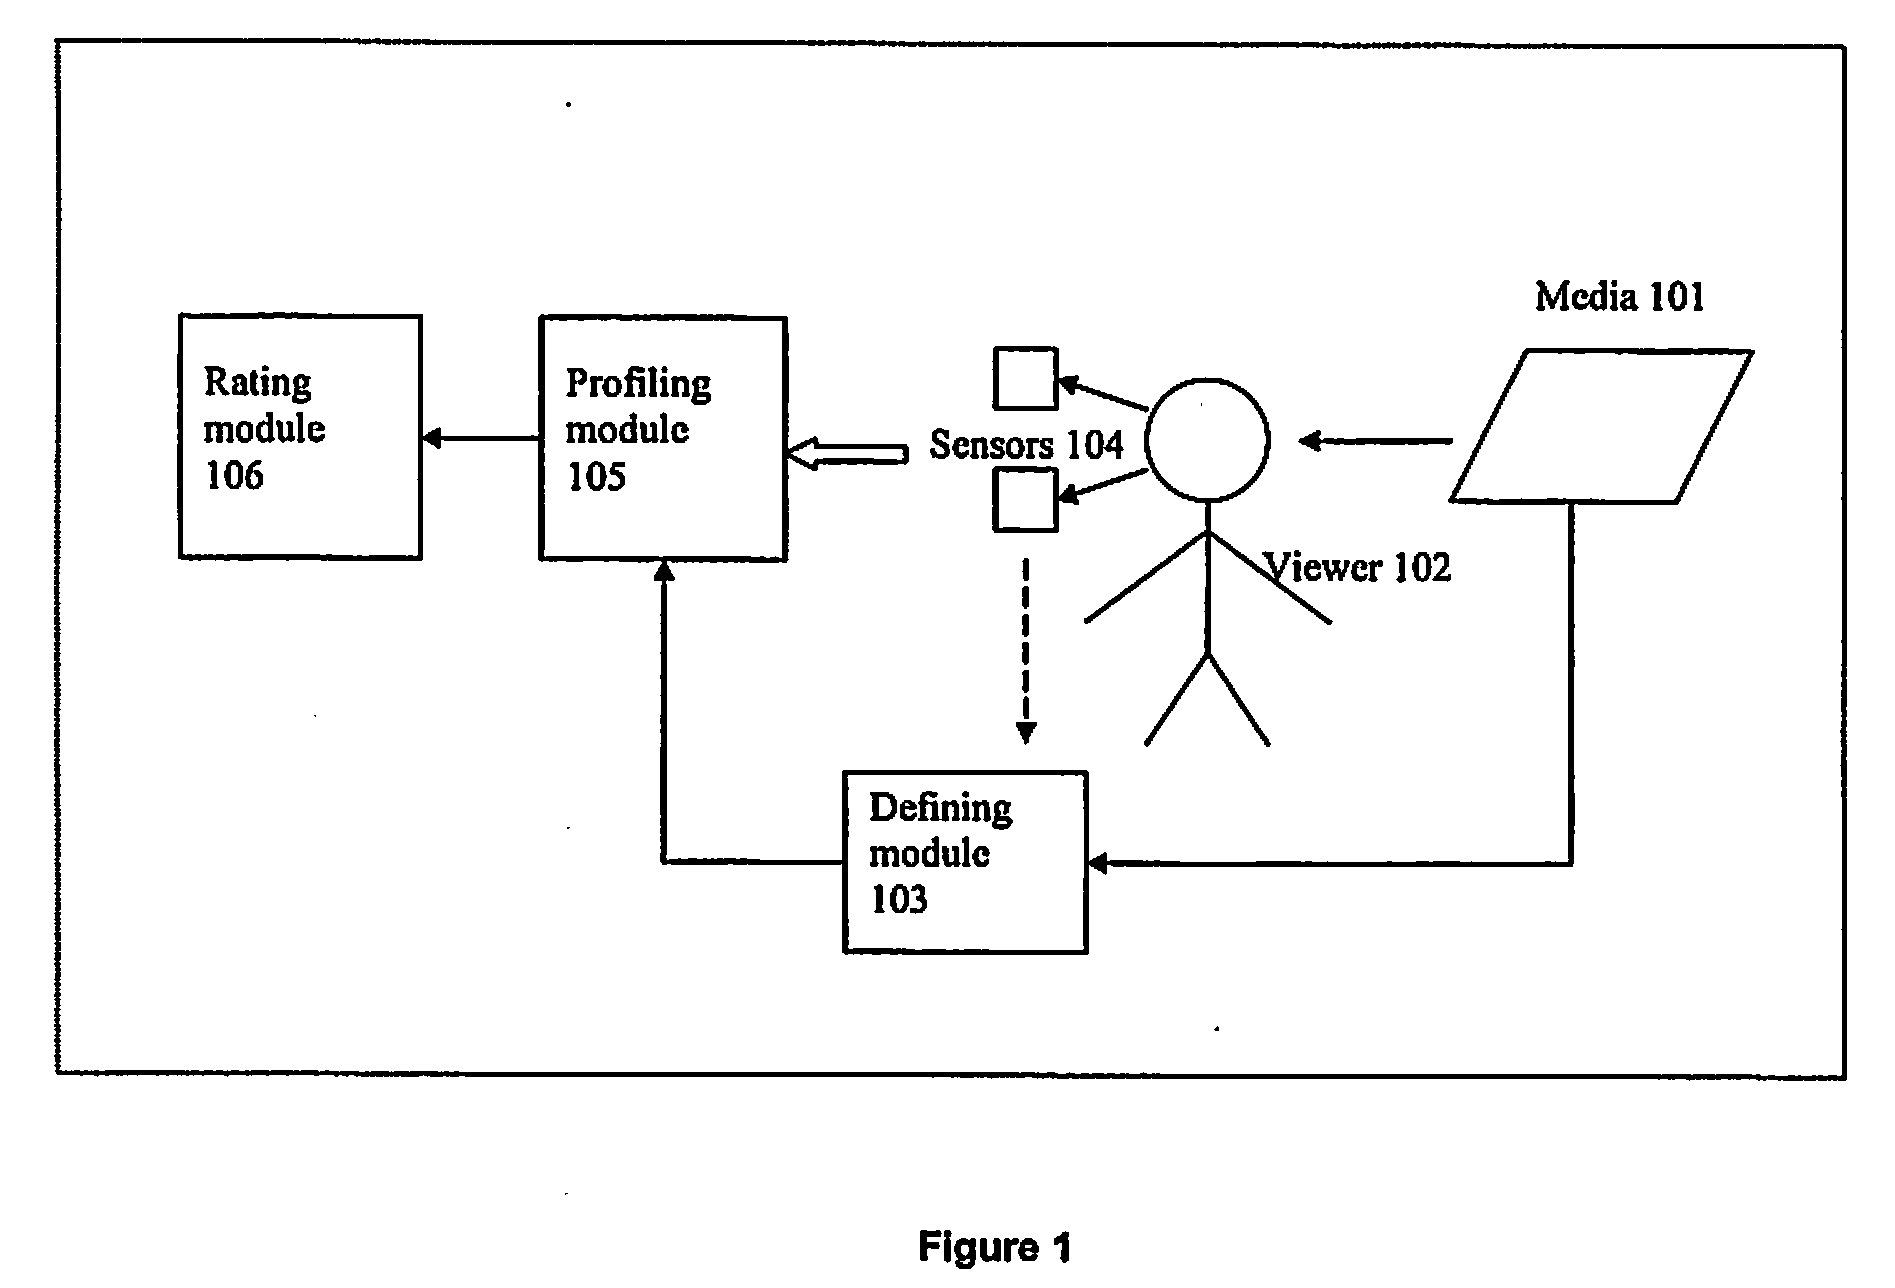 Method And System For Creating An Aggregated View Of User Response Over Time-Variant Media Using Physiological Data